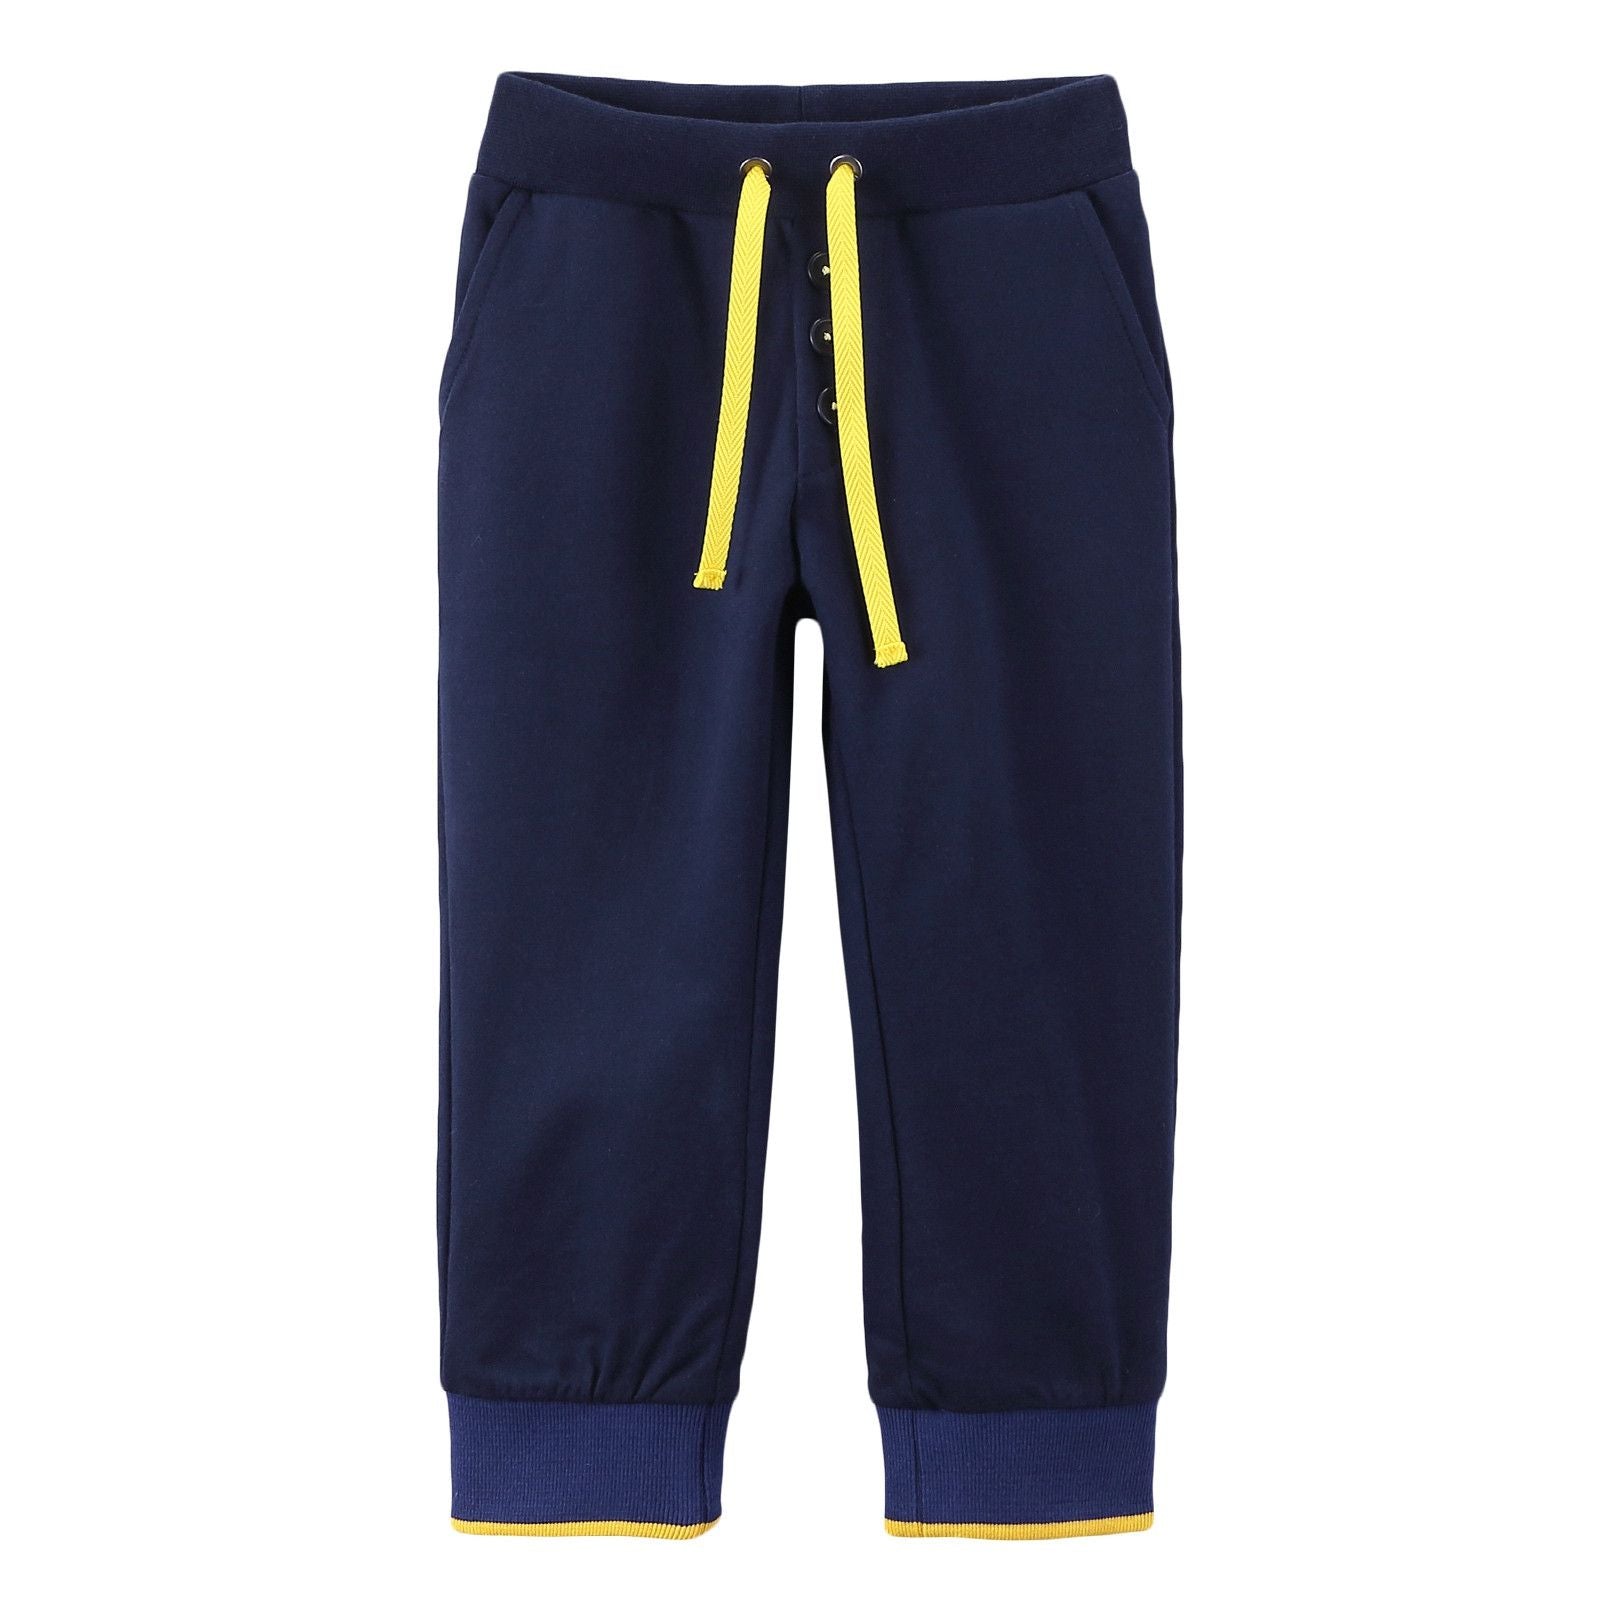 Boys Blue Drawstring Cotton Trousers With Ribbed Cuffs - CÉMAROSE | Children's Fashion Store - 1